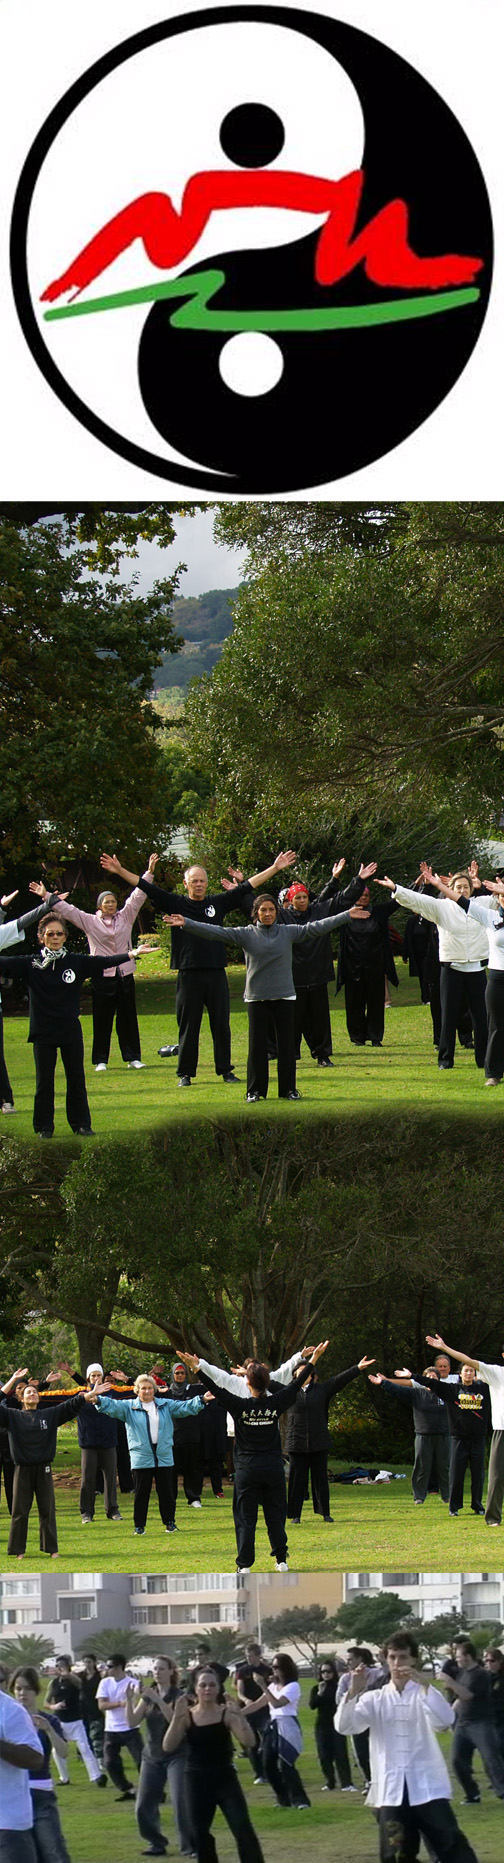 South Africa World Tai Chi and Qigong Day